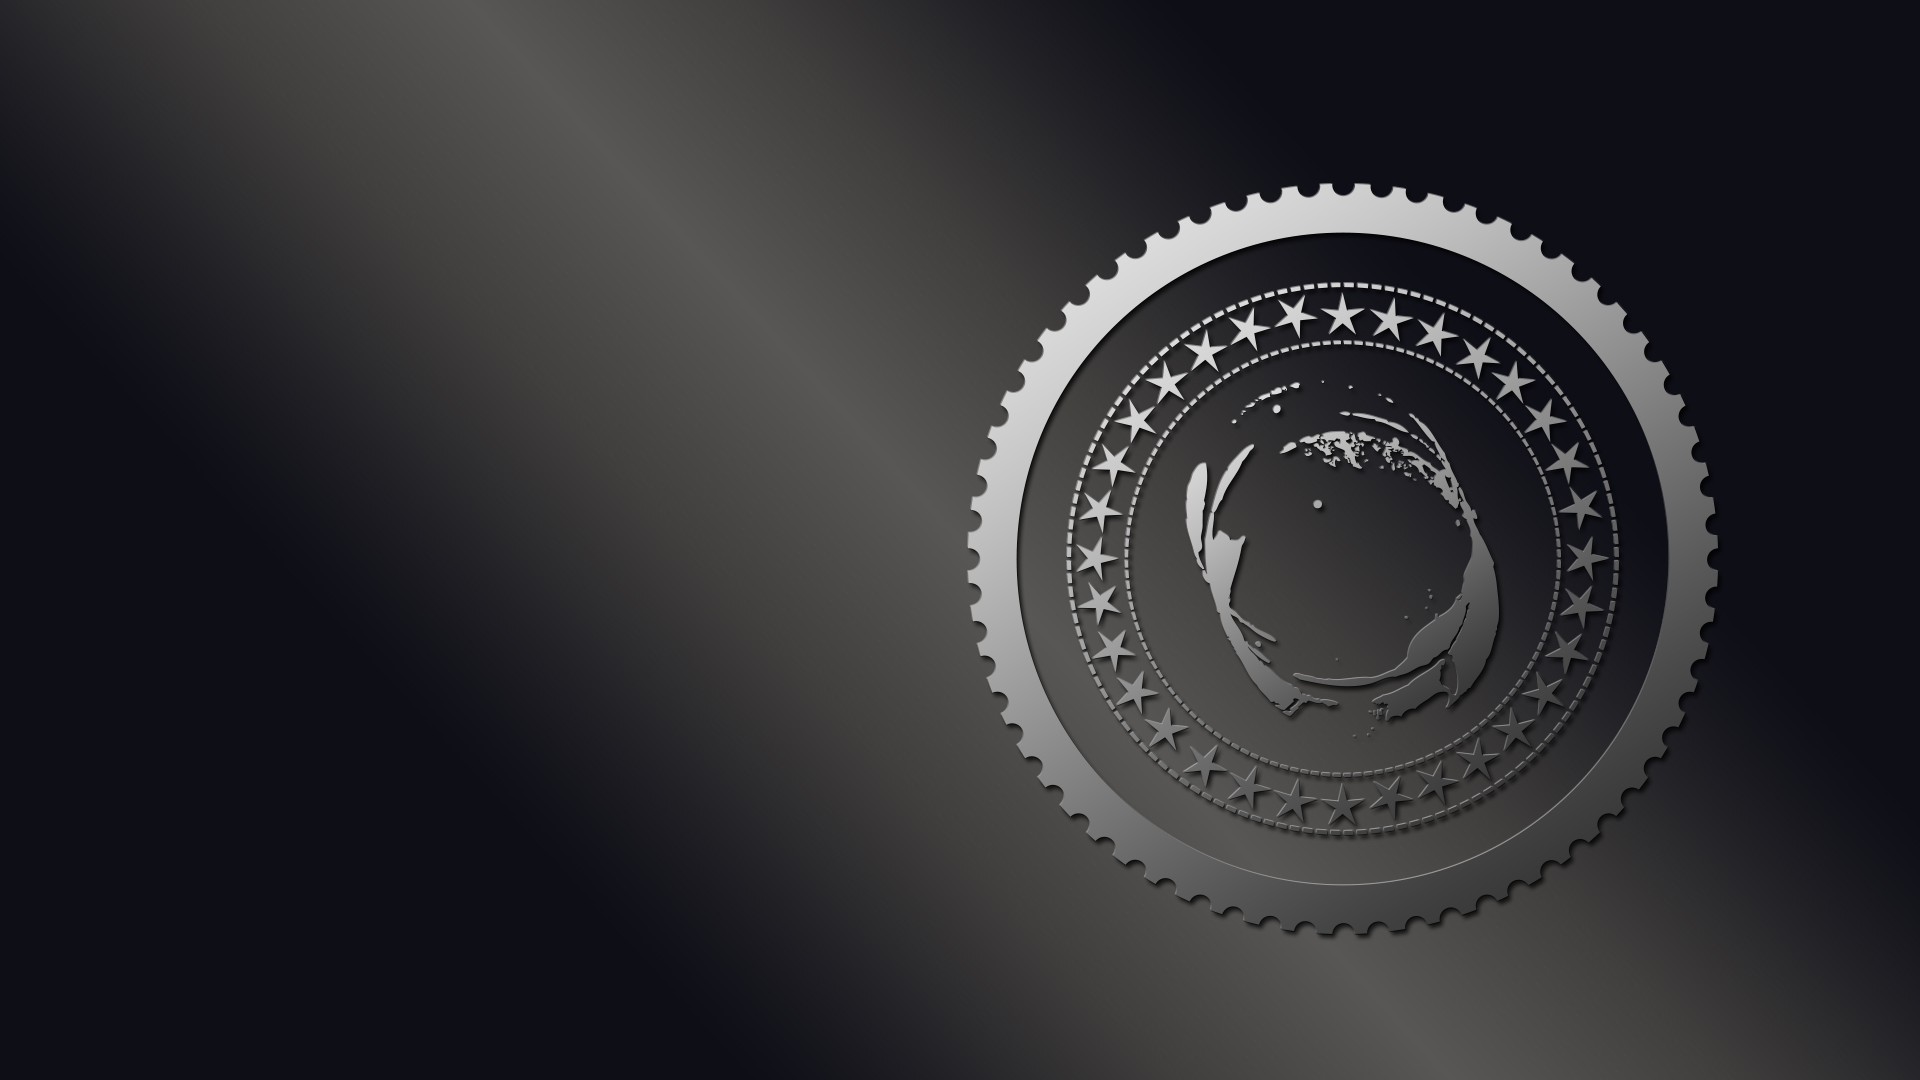 General 1920x1080 simple background logo circle gray background